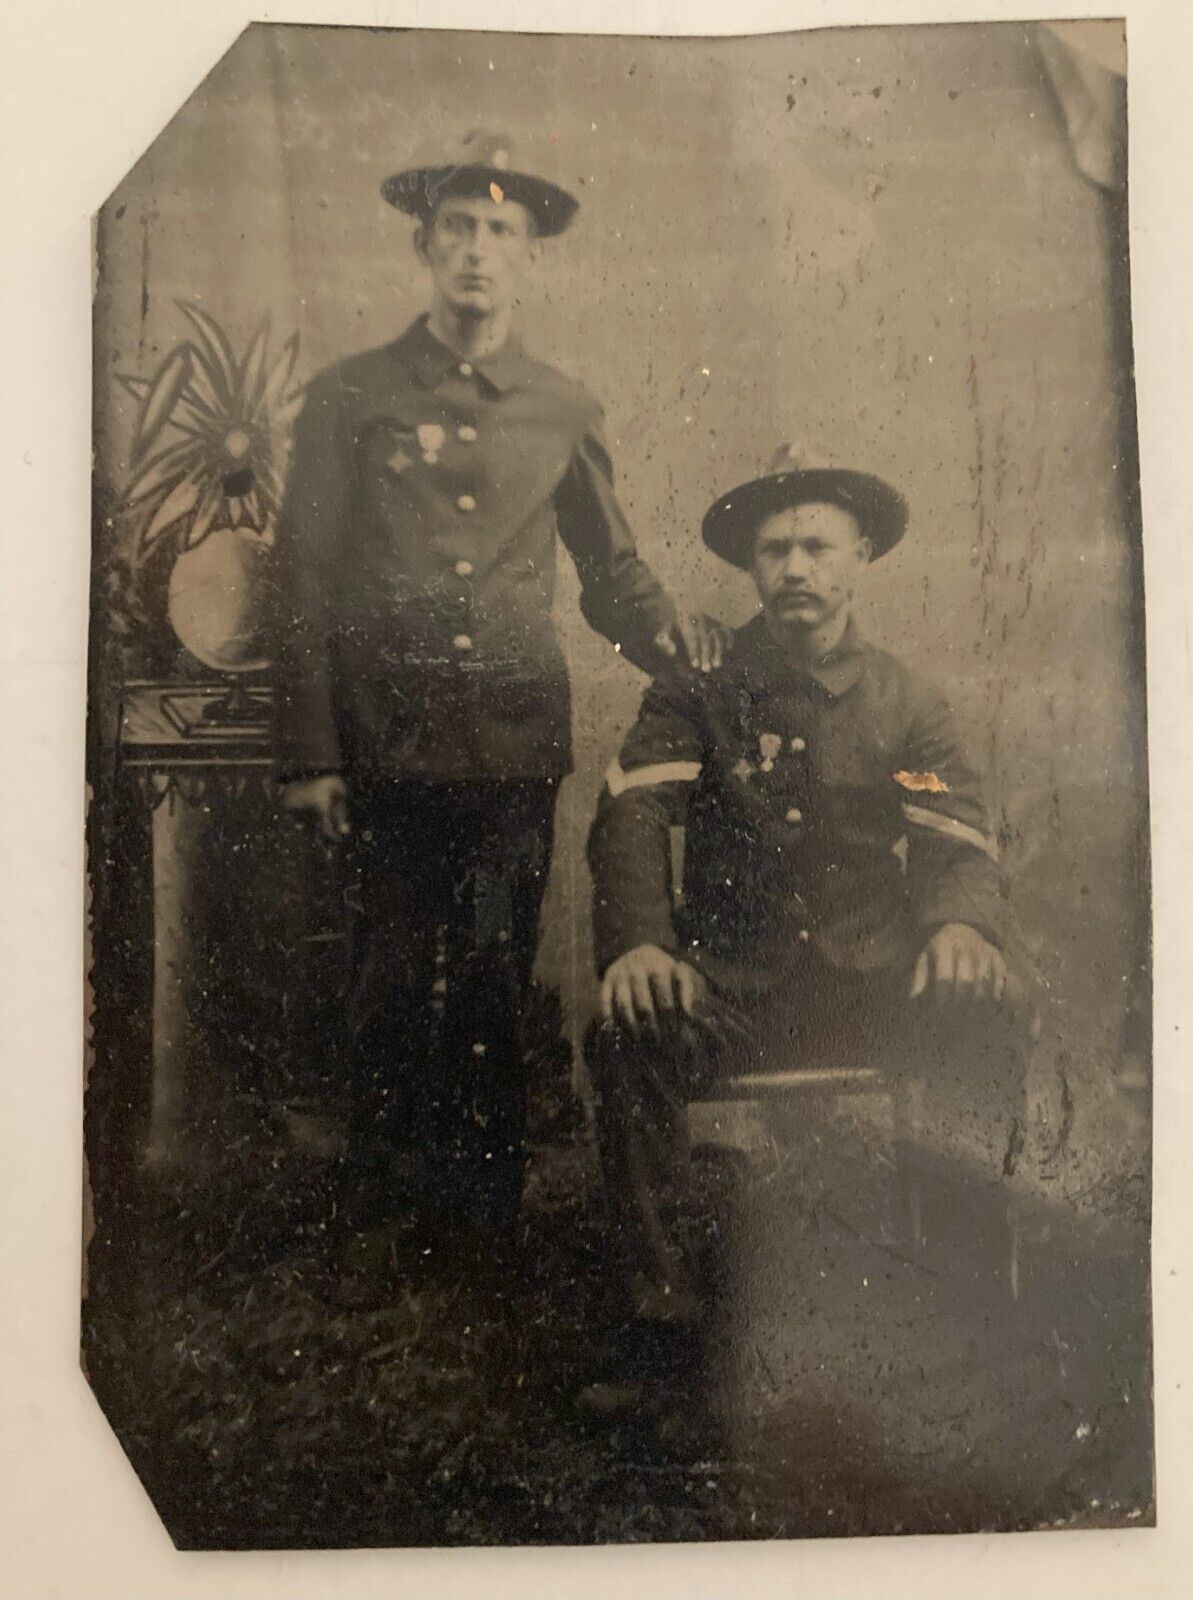 1860s civil war Tintype Tin Type Two Men BROTHERS IN Uniform Soldier